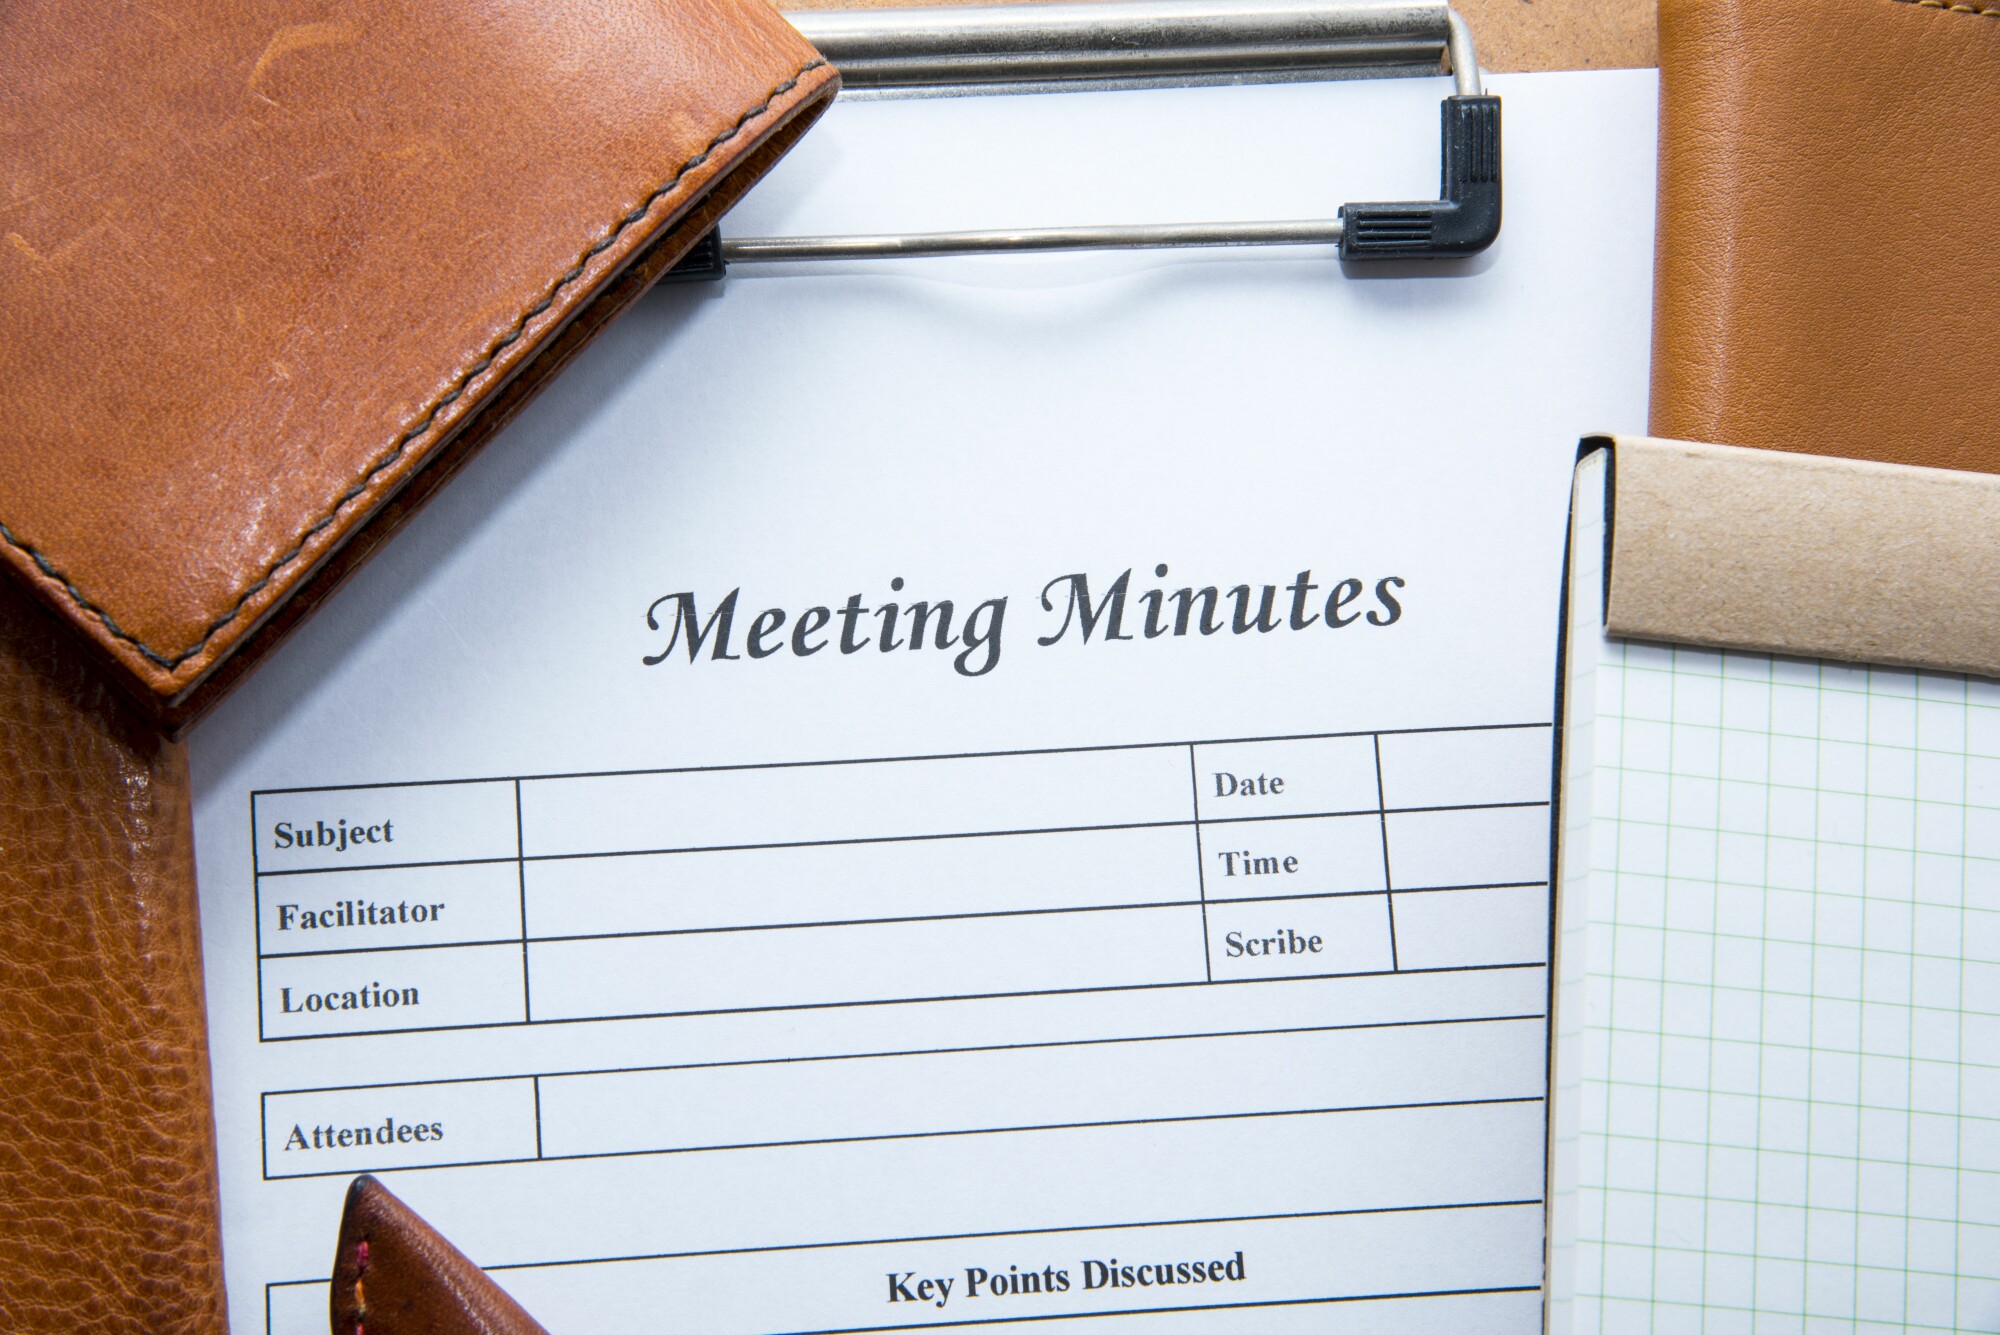 Meeting Minutes Form